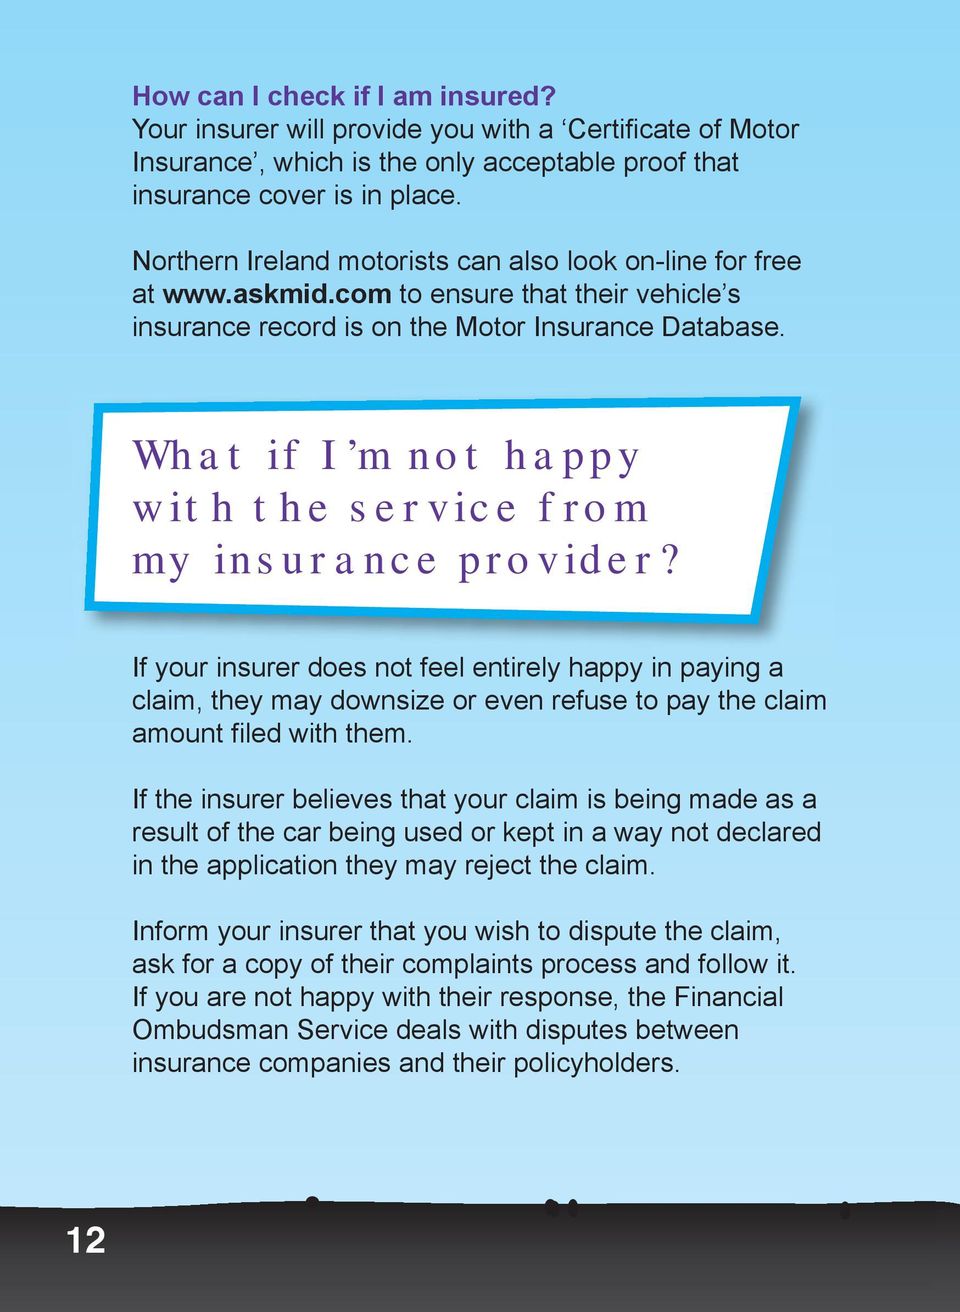 What if I m not happy with the service from my insurance provider?